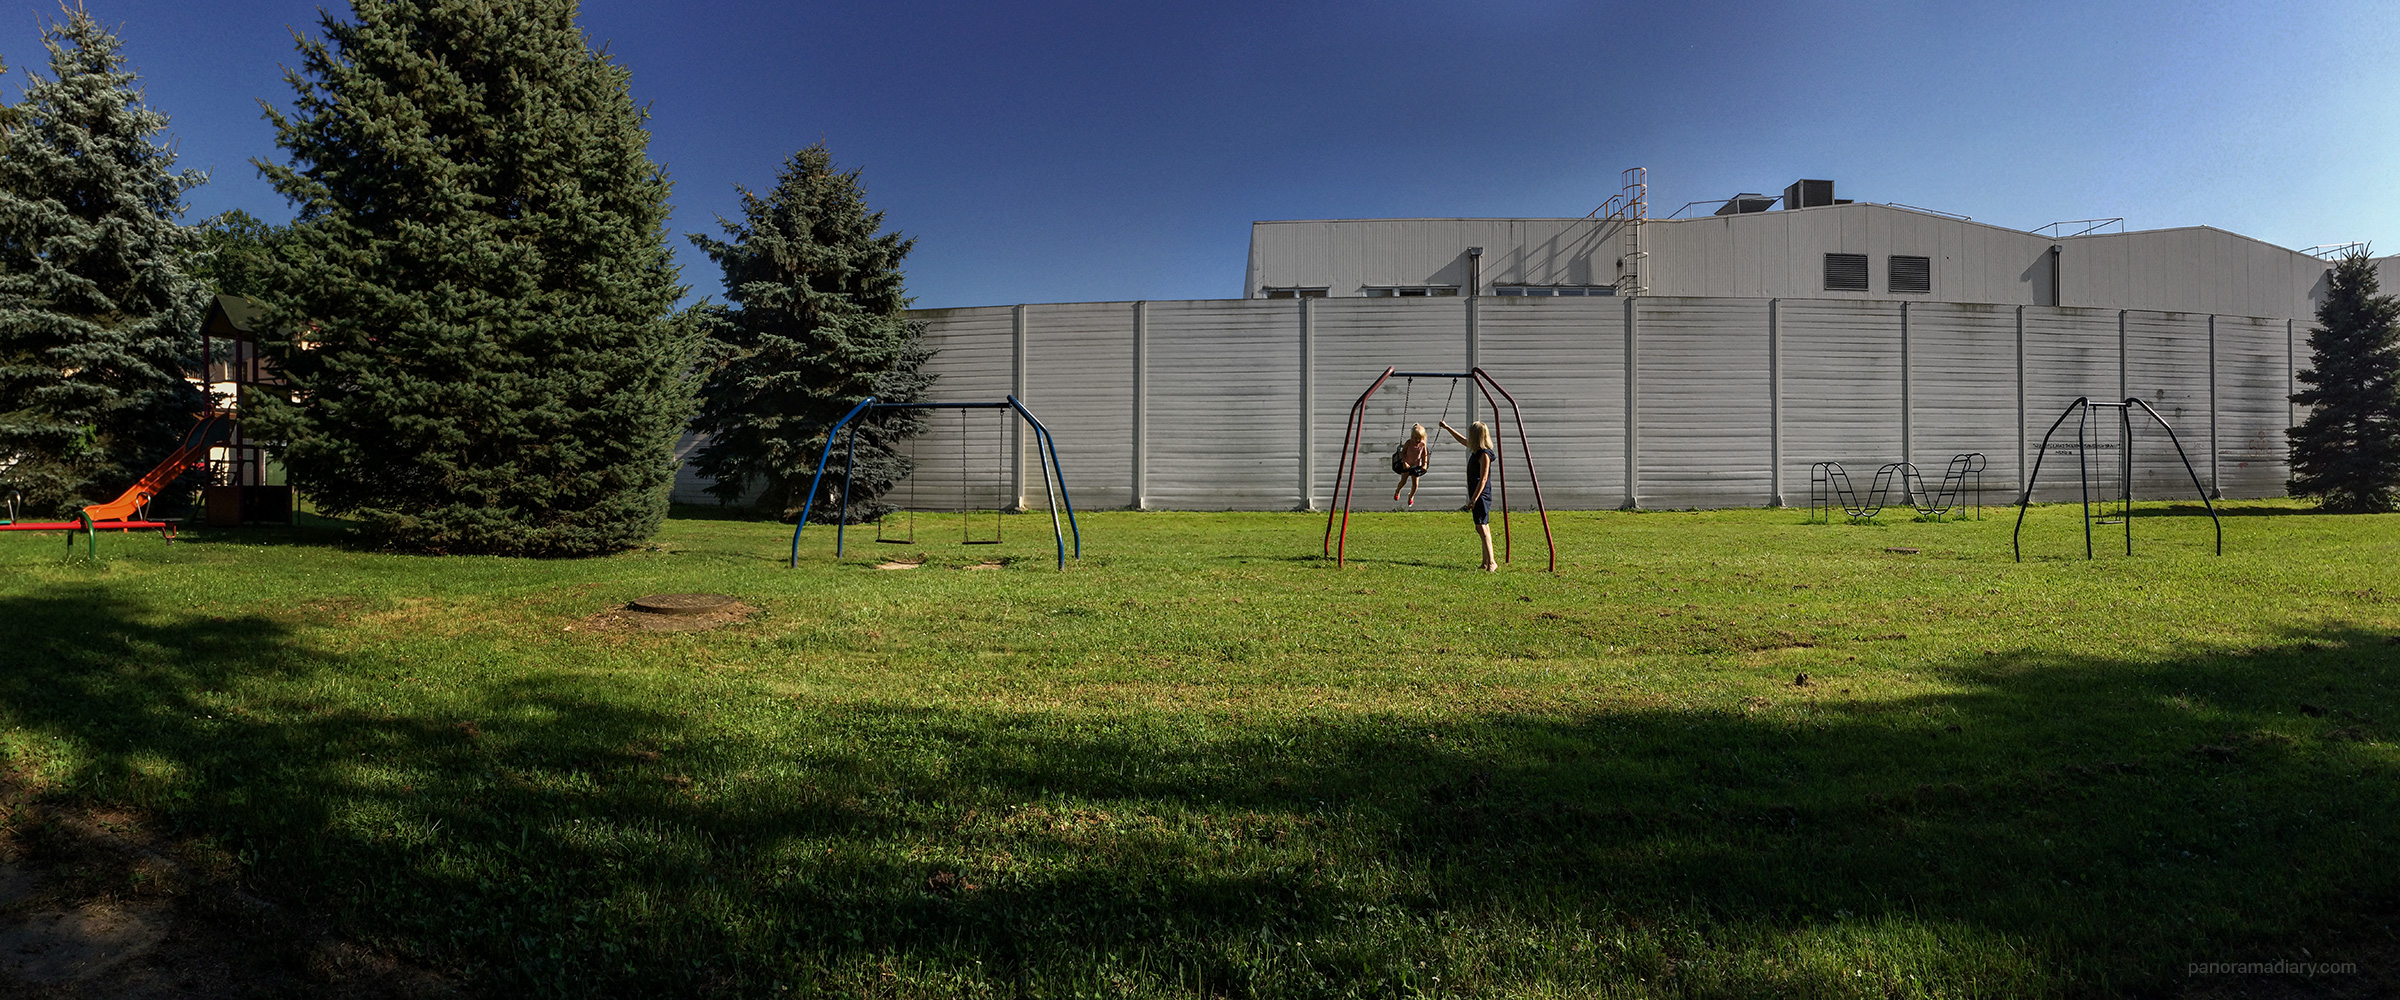 Kids swing in industrial area | PANORAMA DIARY